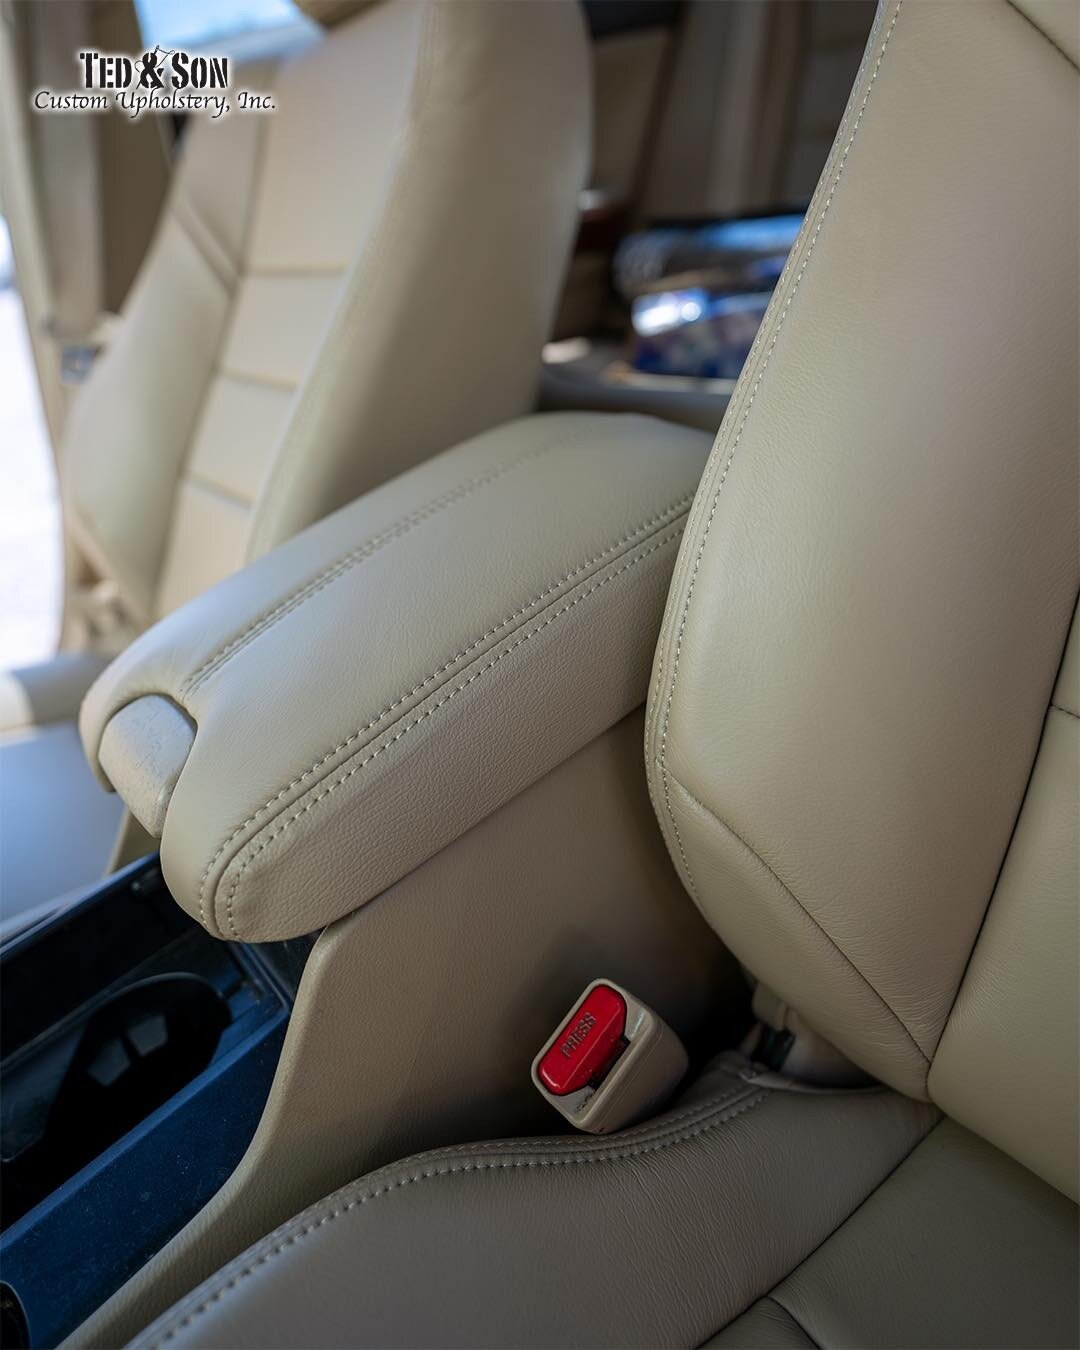 Honda Accord with some new Katzkin leather! In and out in one day and looking good. 😎

3414 Enterprise Ave 
Naples FL 34104 
239-649-6344

#Upholstery #TedandSon #customupholstery #Naples #NaplesFL #fortmyersbeach #fortmyers #bonitaspringsfl  #Flori